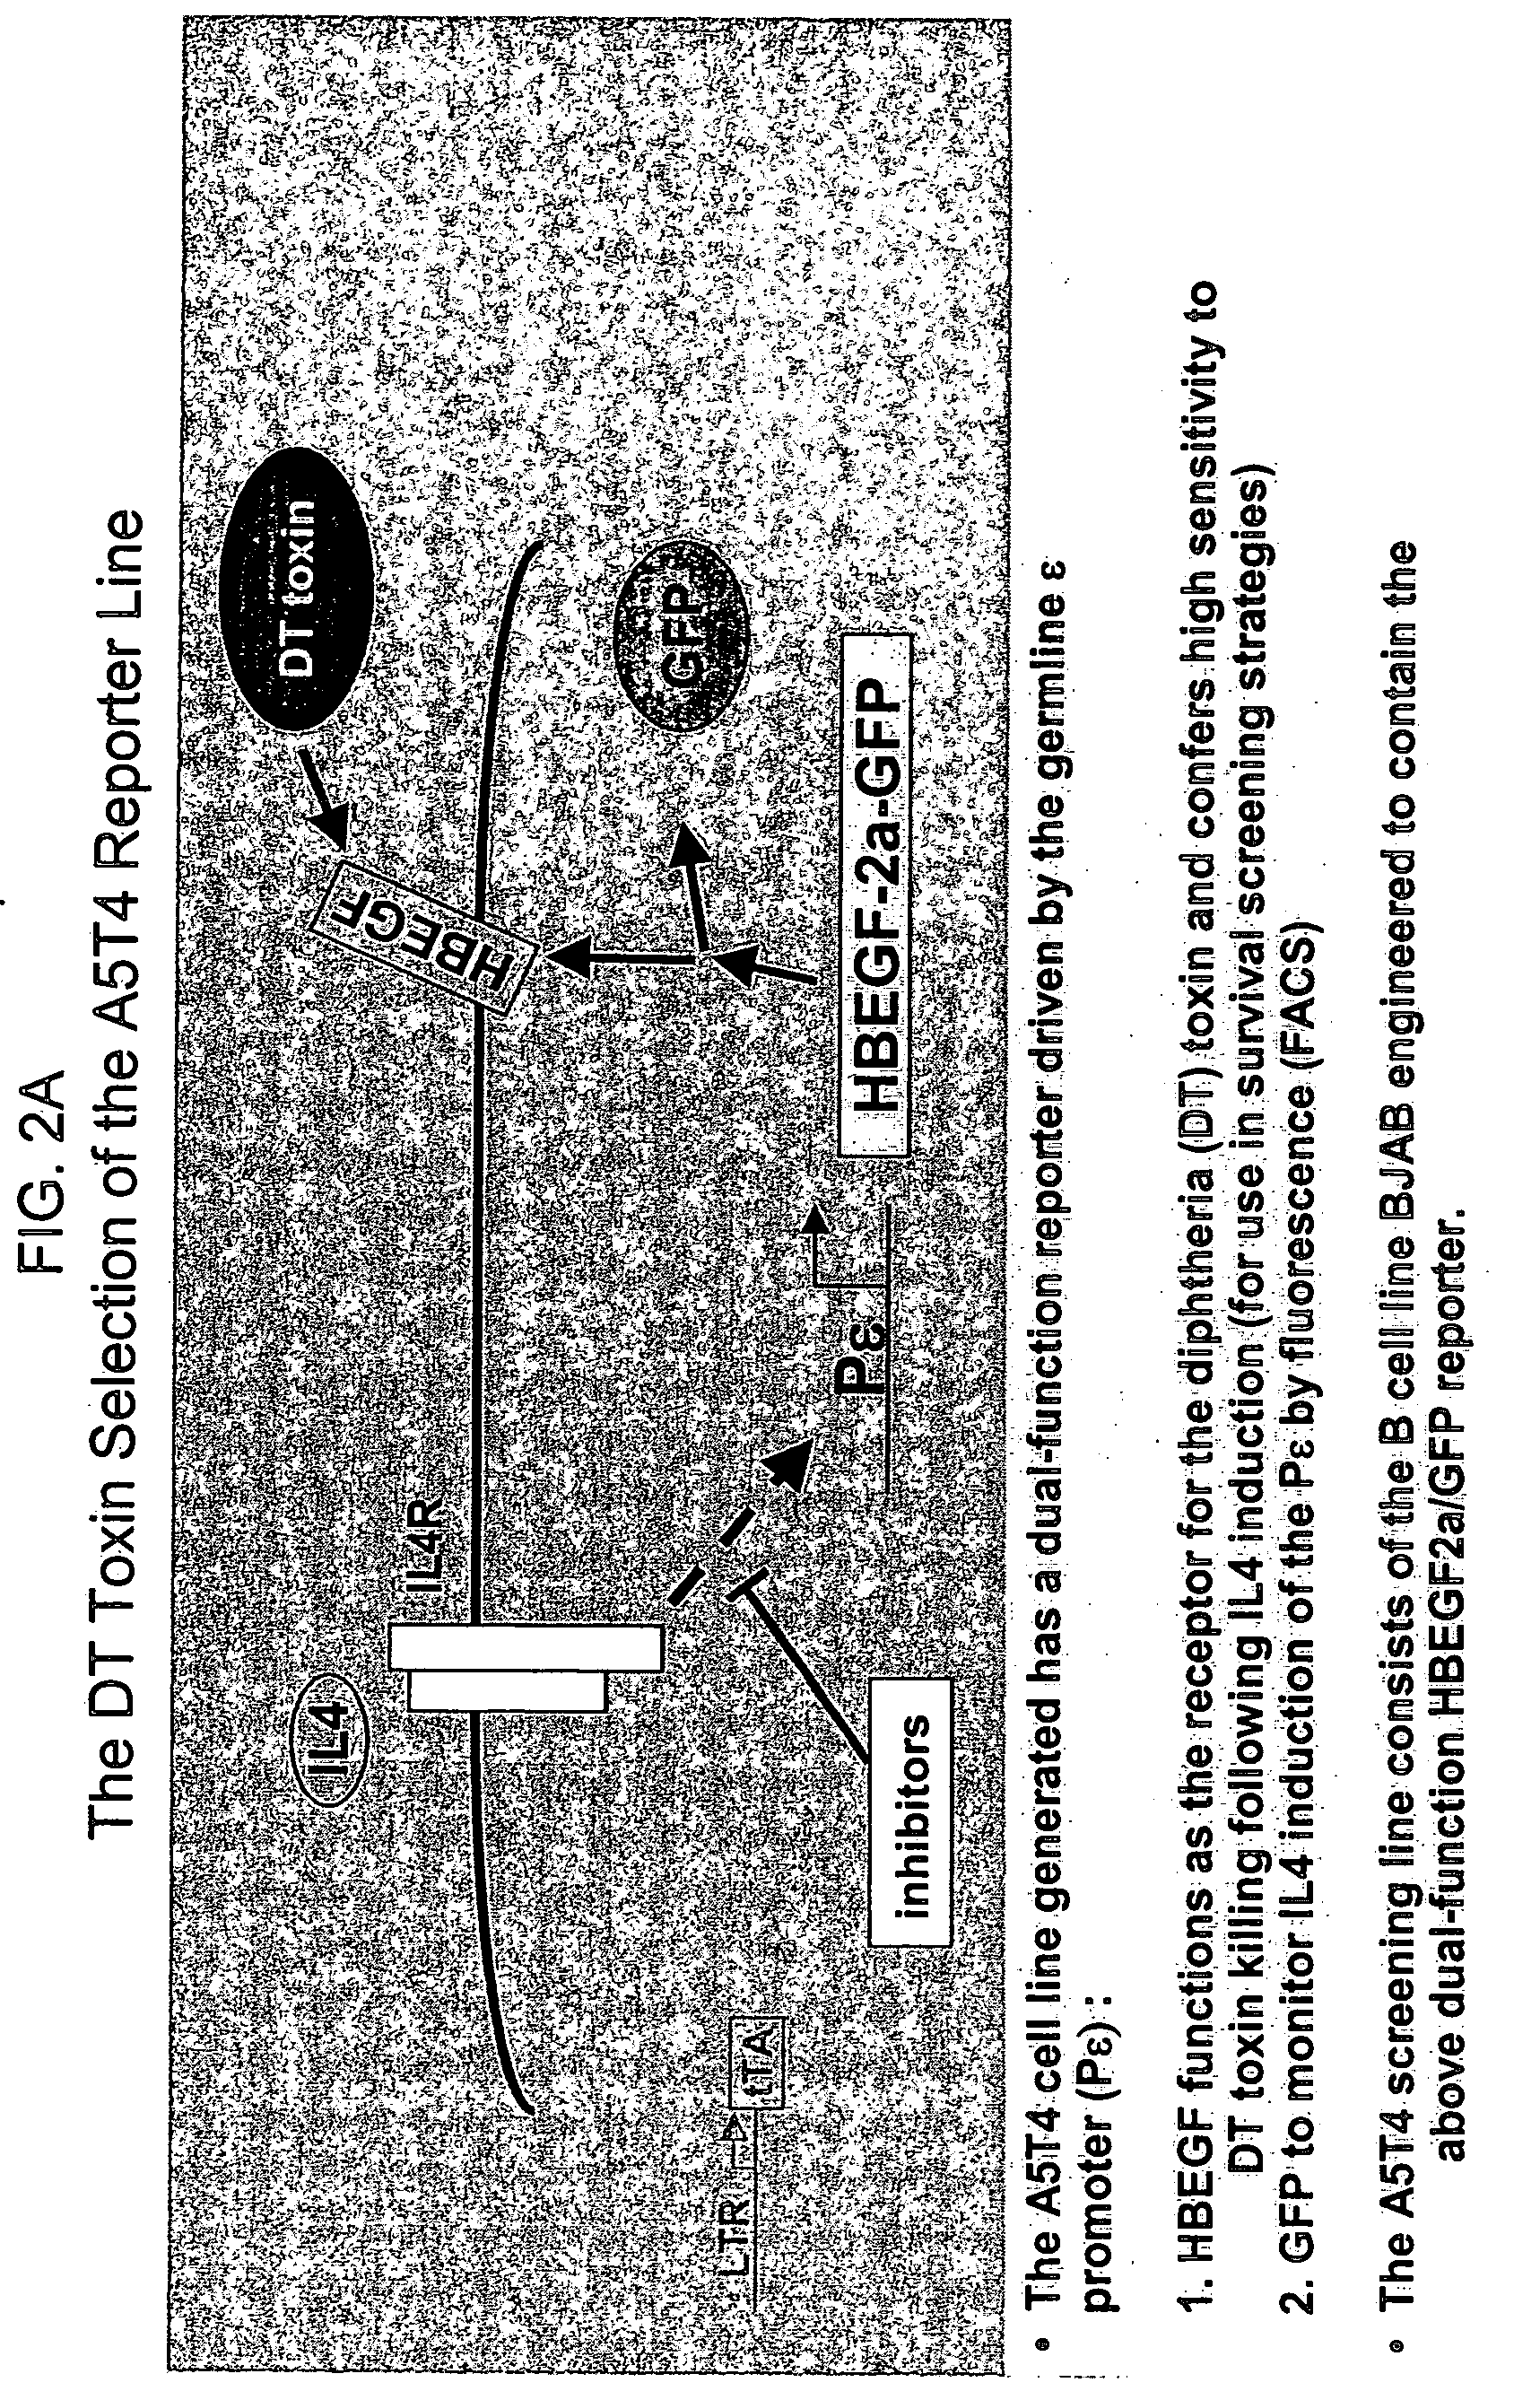 Methods of identifying compounds that modulate IL-4 receptor mediated IgE synthesis utilizing a CLLD8 protein